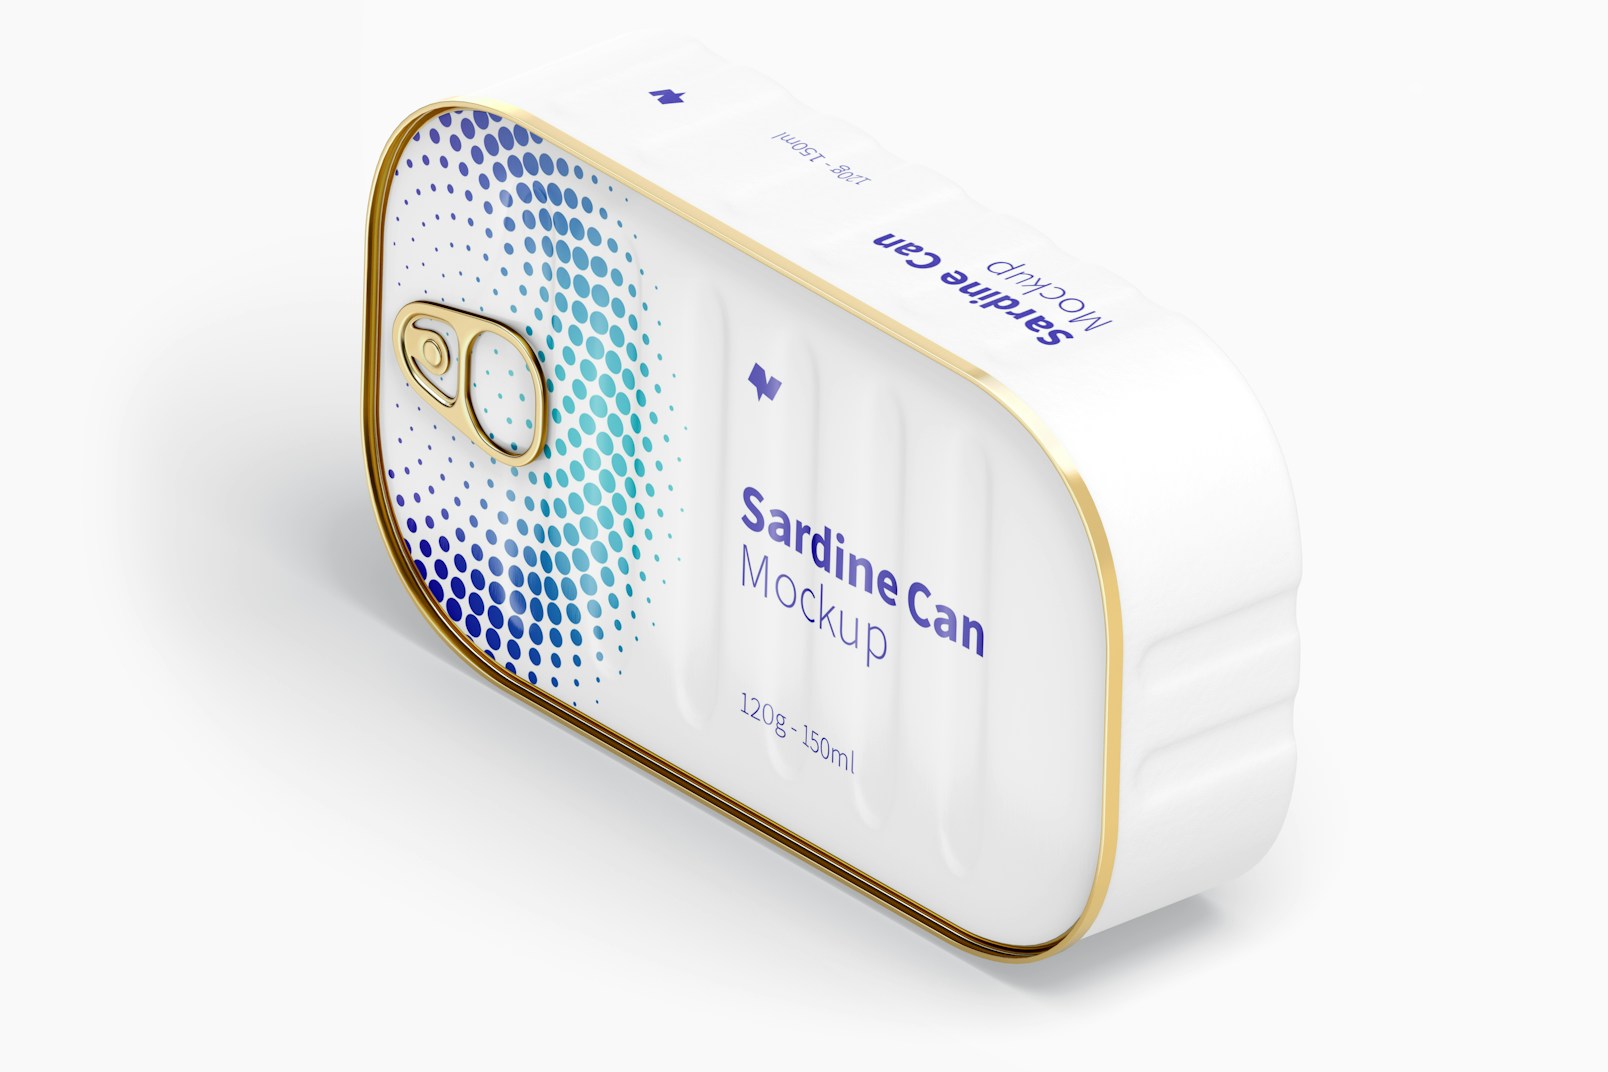 120g Sardine Can Mockup, Isometric Left Side View